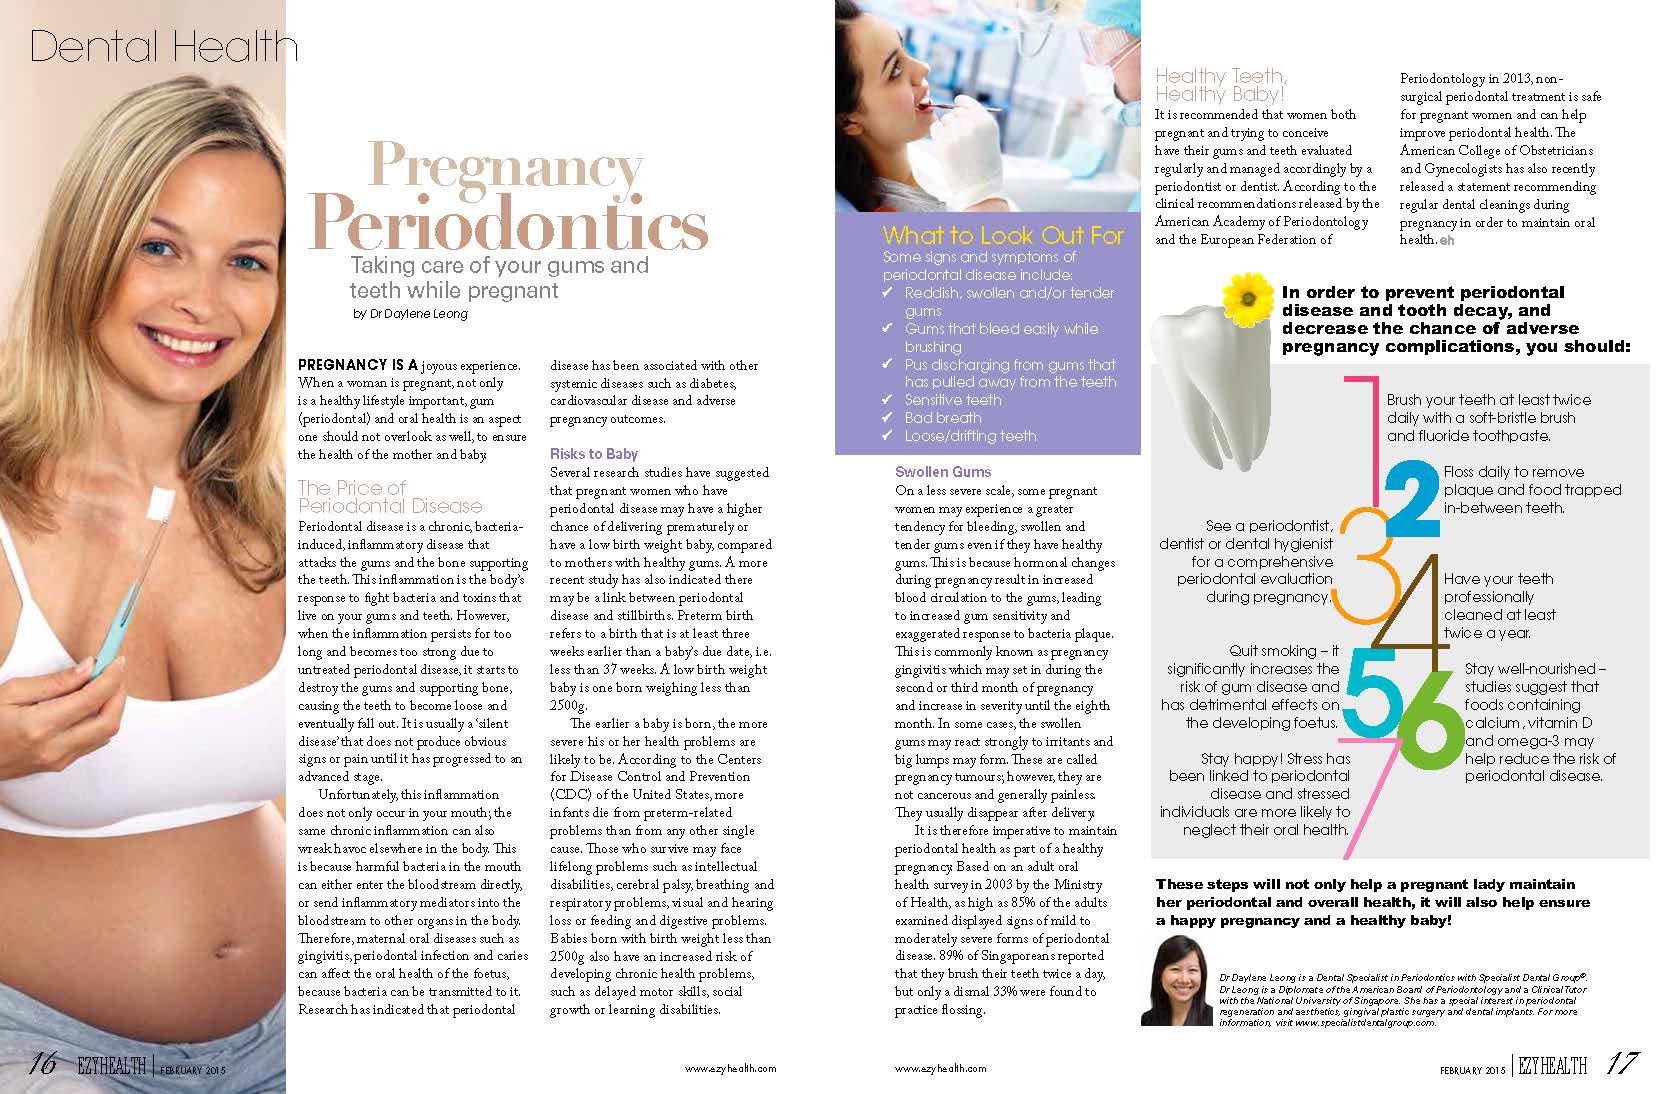 Ezyhealth Magazine, February 2015 issue: “Pregnancy Periodontics – Taking care of your gums and teeth while pregnant”